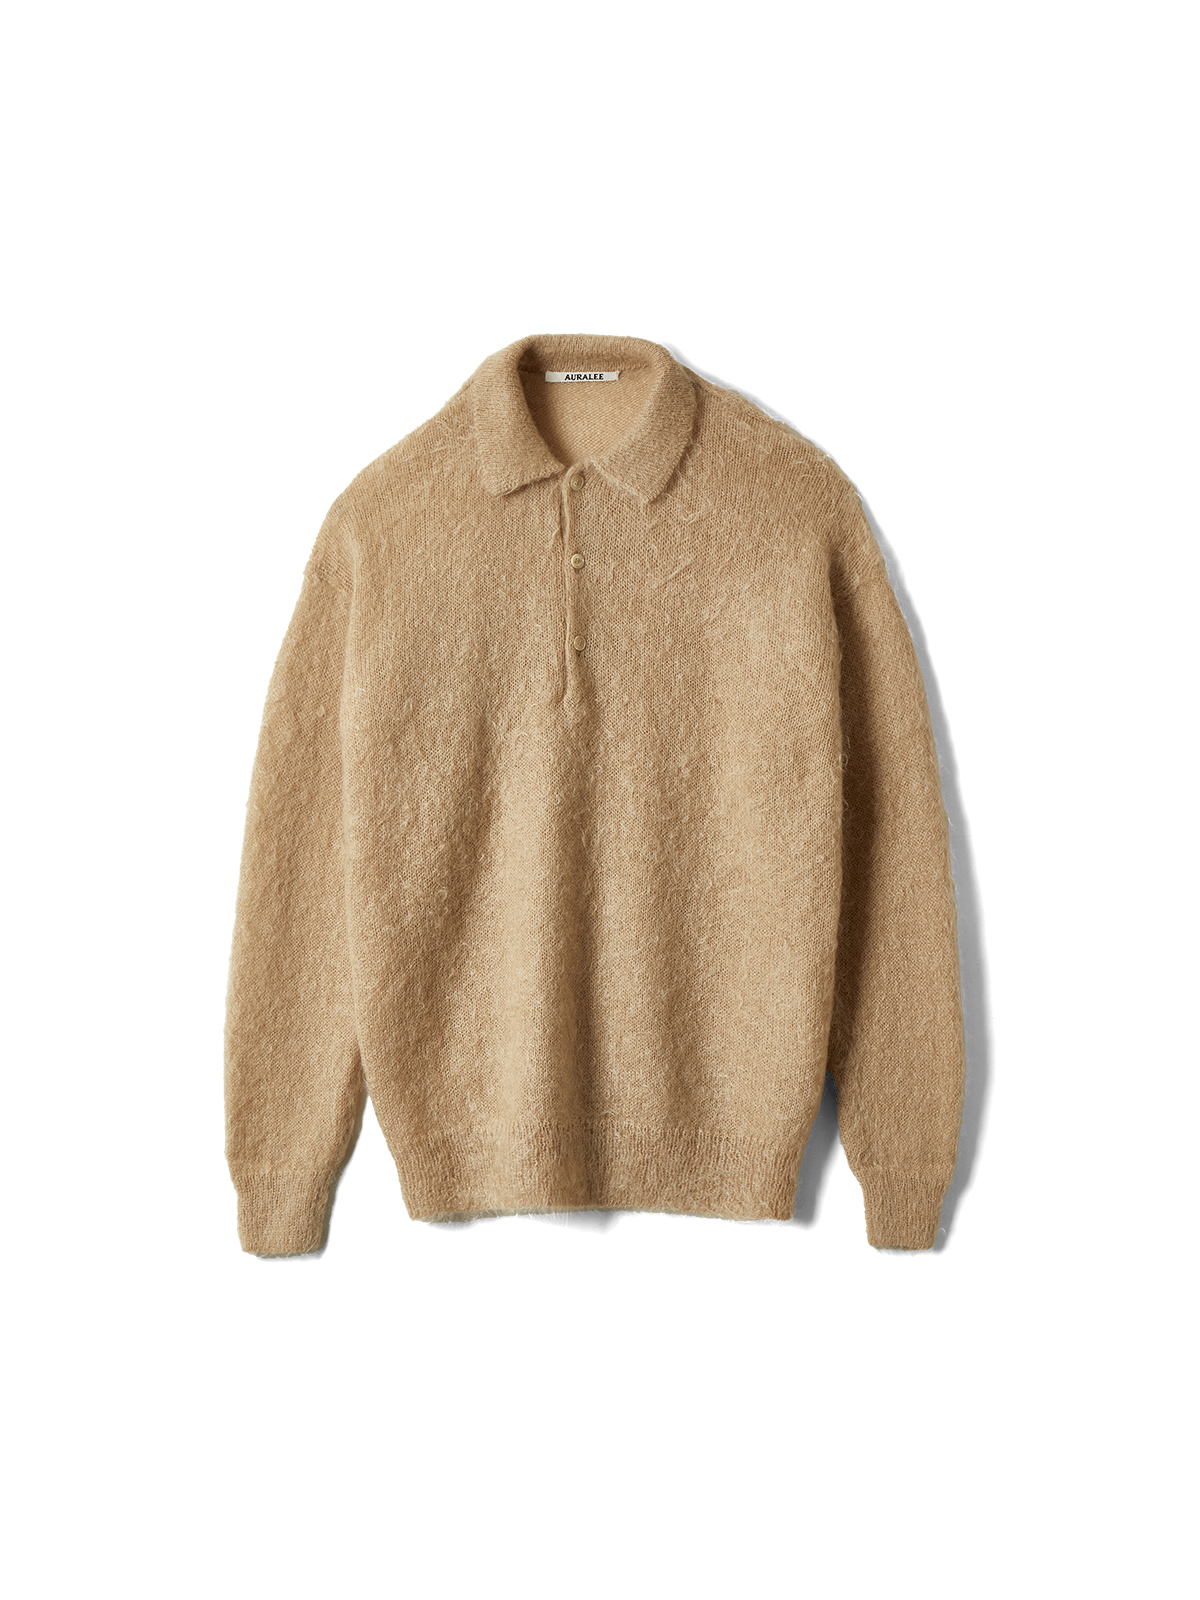 BRUSHED SUPER KID MOHAIR KNIT POLO (BEIGE)